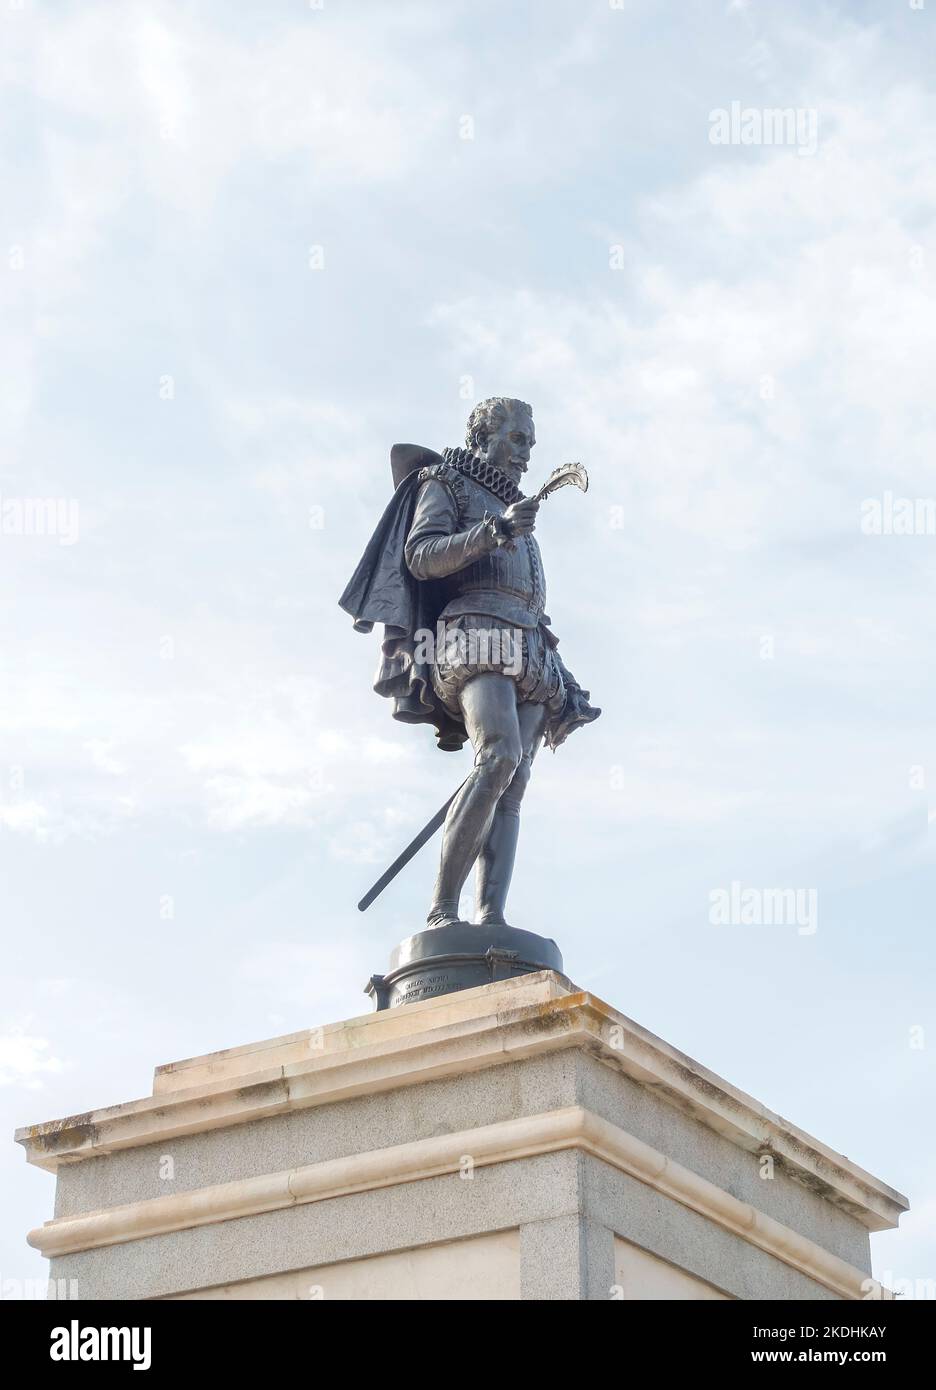 Statue of Spanish writer Miguel de Cervantes Saavedra in the town of his birth Alcala de Henares, Spain with copy space Stock Photo